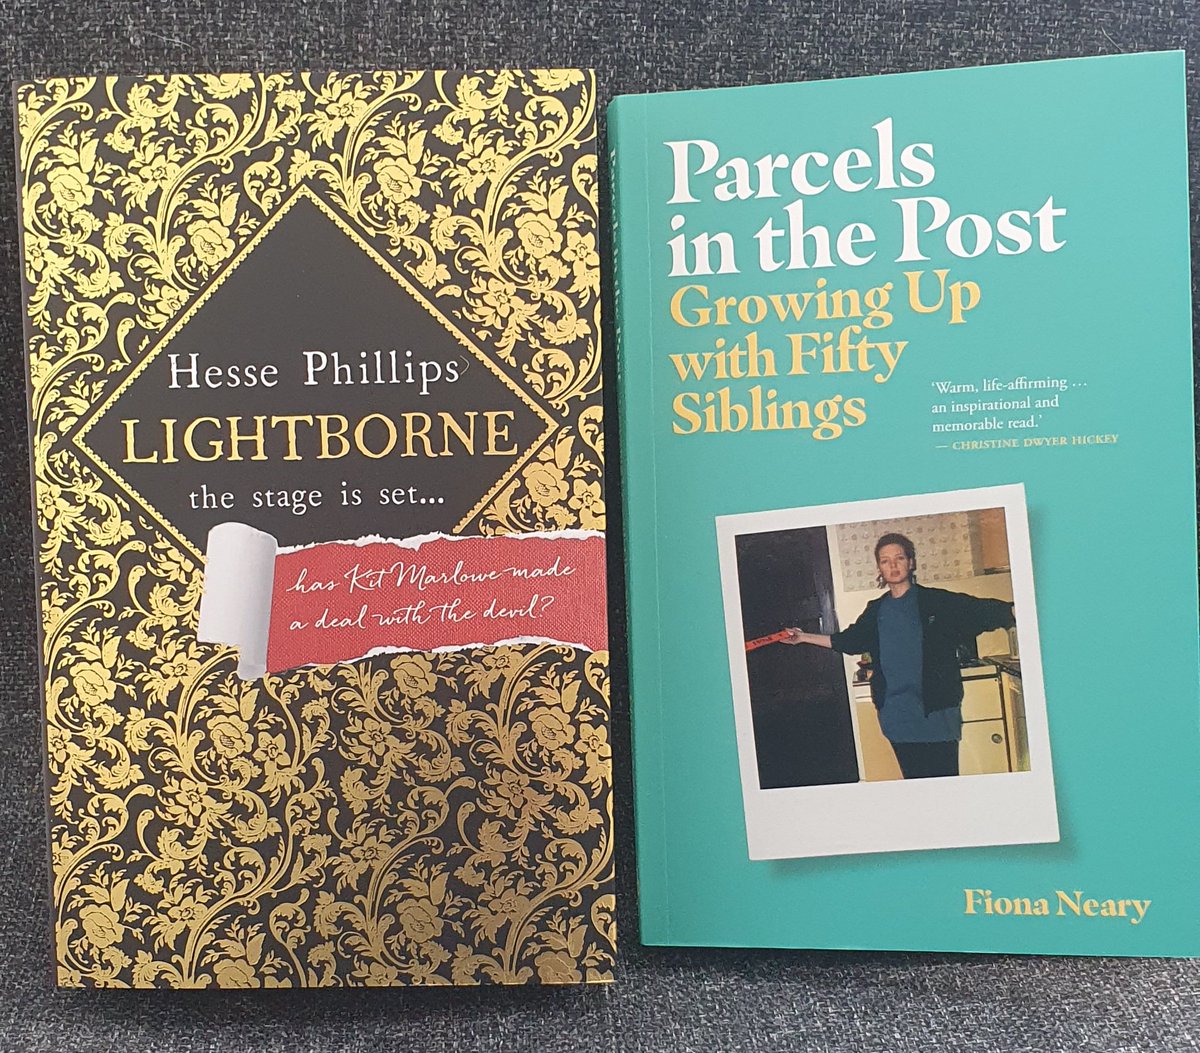 You wait ages for clients' finished copies to arrive, and then two come together. Delighted to get my copies of #Lightborne by @HessePhillips (@AtlanticBooks) and #Parcelsinthepost by Fiona Neary (@NewIslandBooks), both publishing in May.